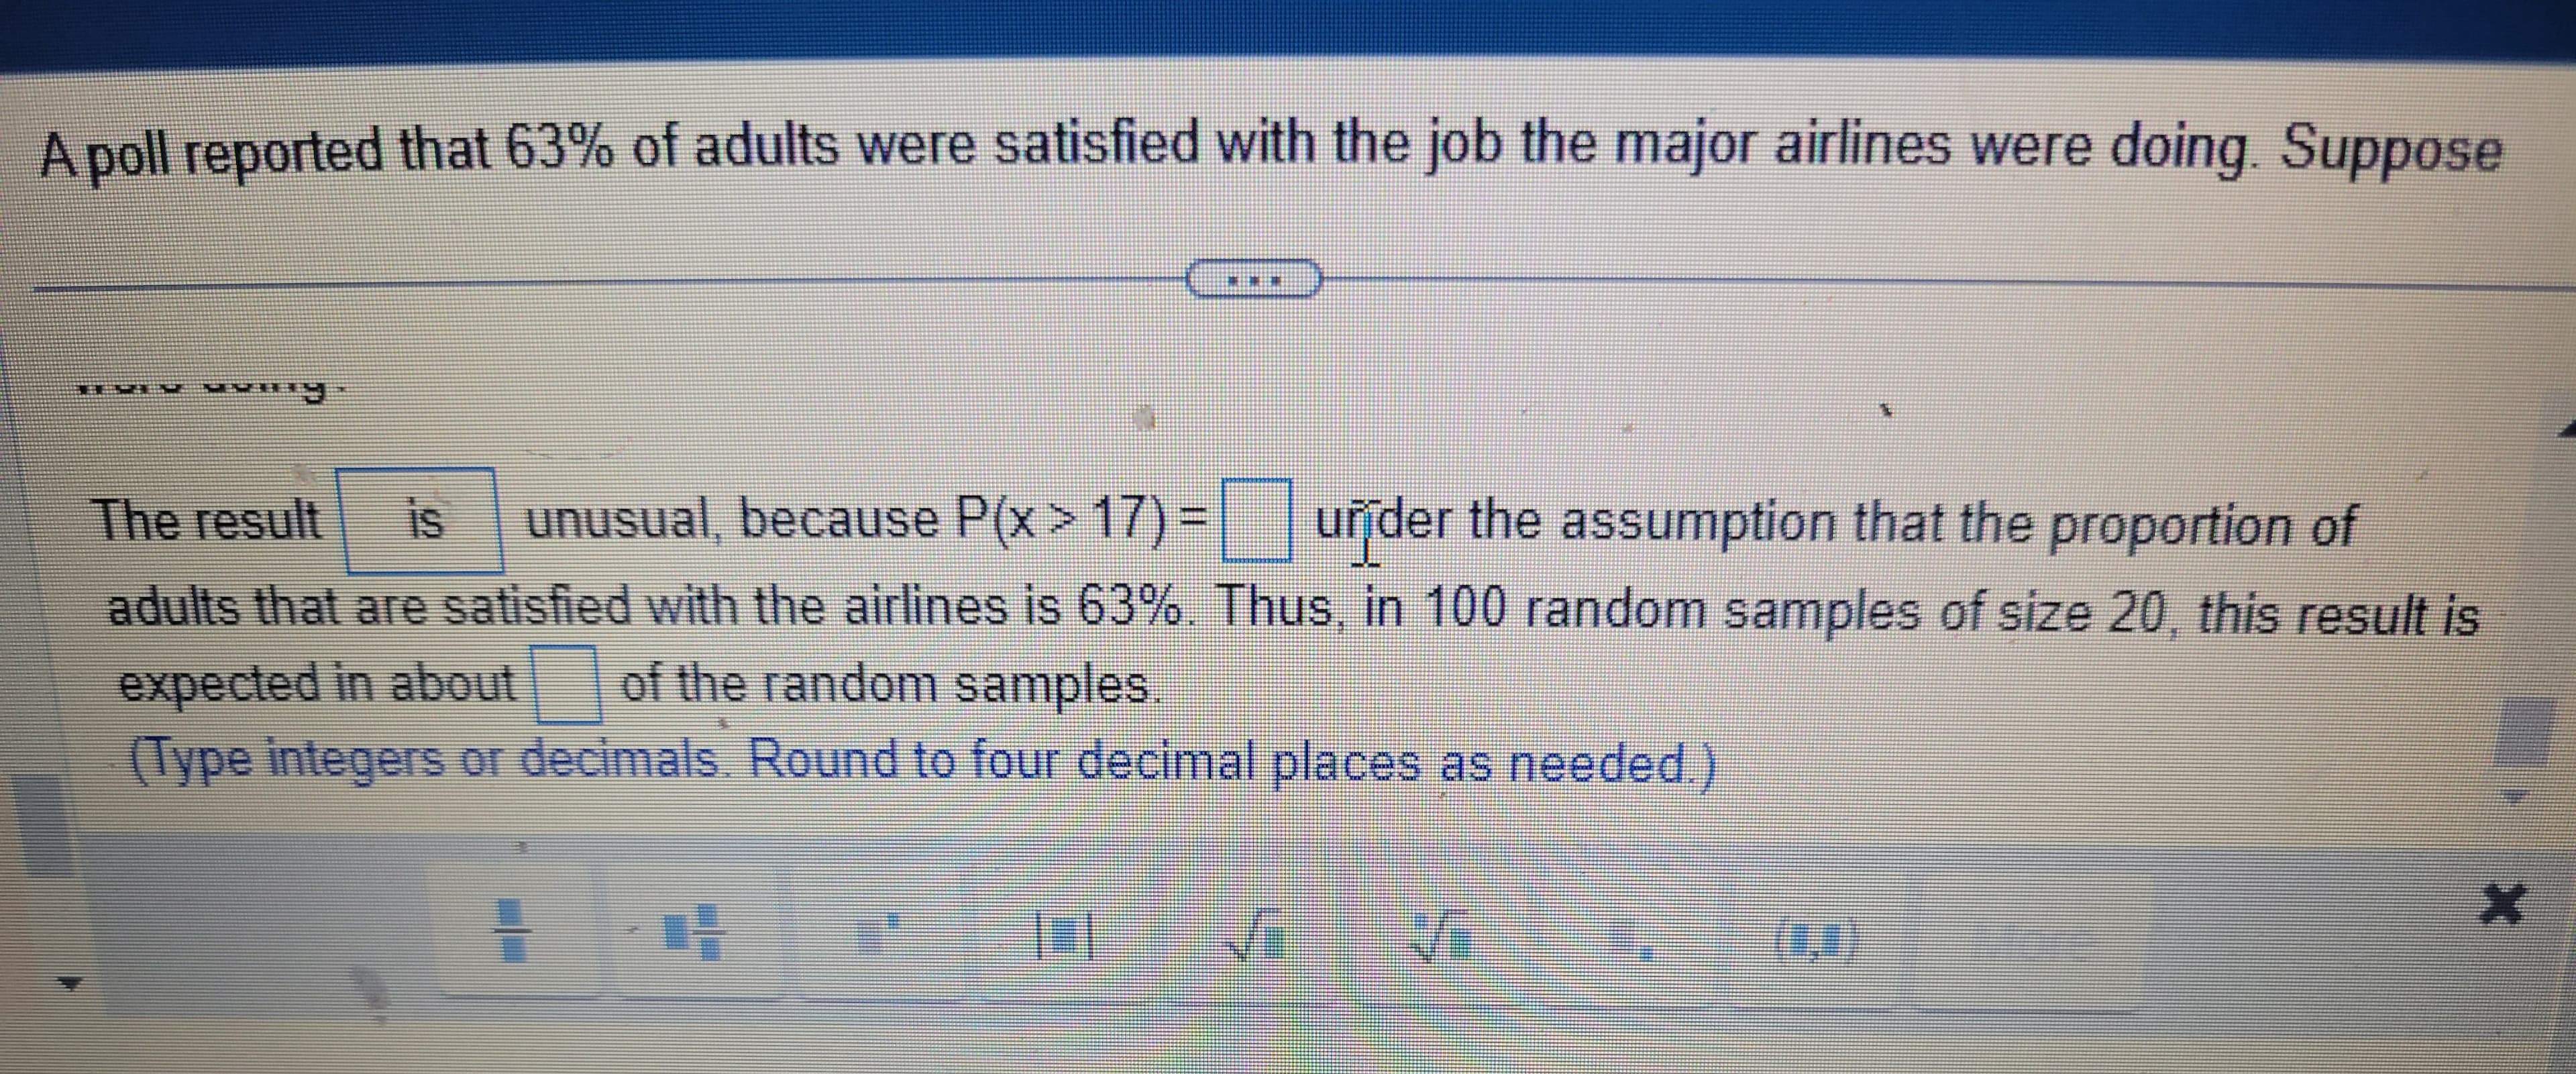 A poll reported that 63% of adults were satisfied with the job the major airlines were doing. Suppose
P
The result is unusual, because P(x>17) = under the assumption that the proportion of
adults that are satisfied with the airlines is 63%. Thus, in 100 random samples of size 20, this result is
expected in about of the random samples
(Type integers or decimals. Round to four decimal places as needed.)
14
NO
Me